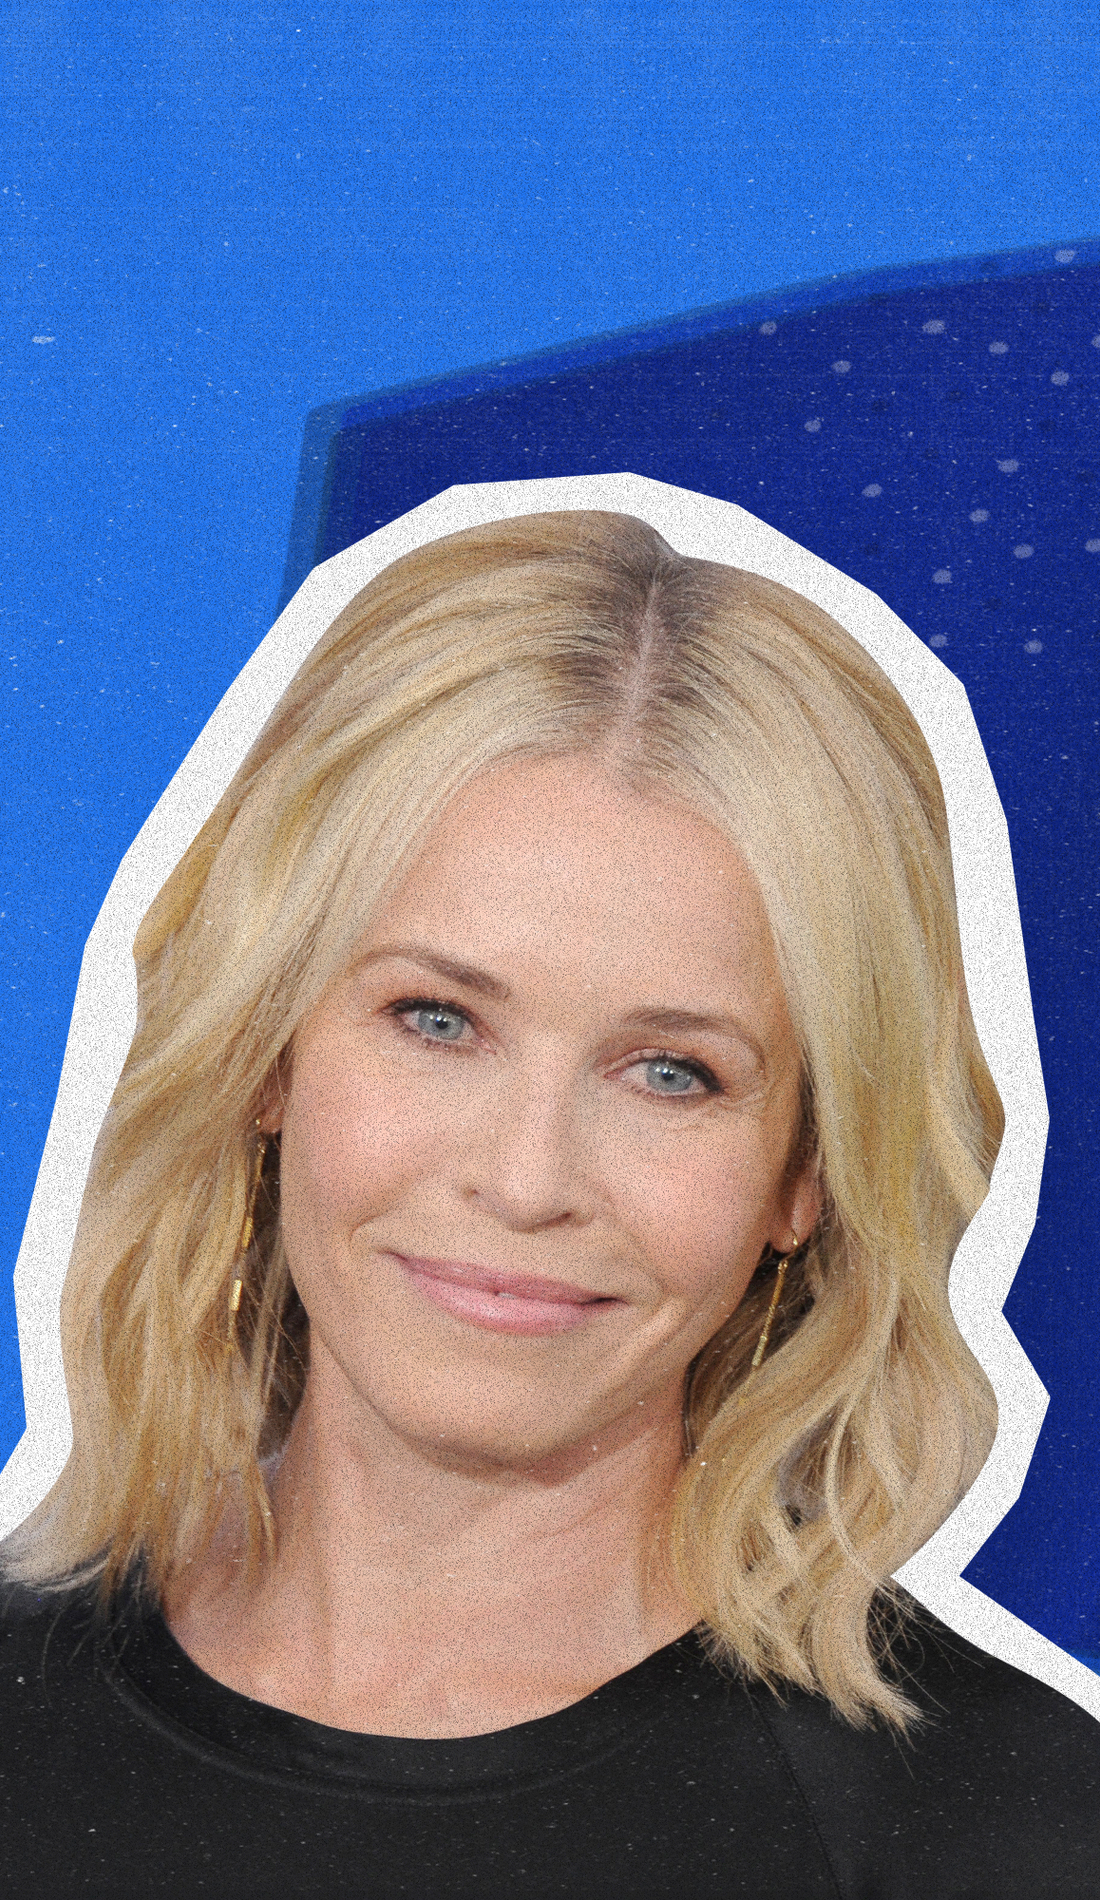 A Chelsea Handler live event